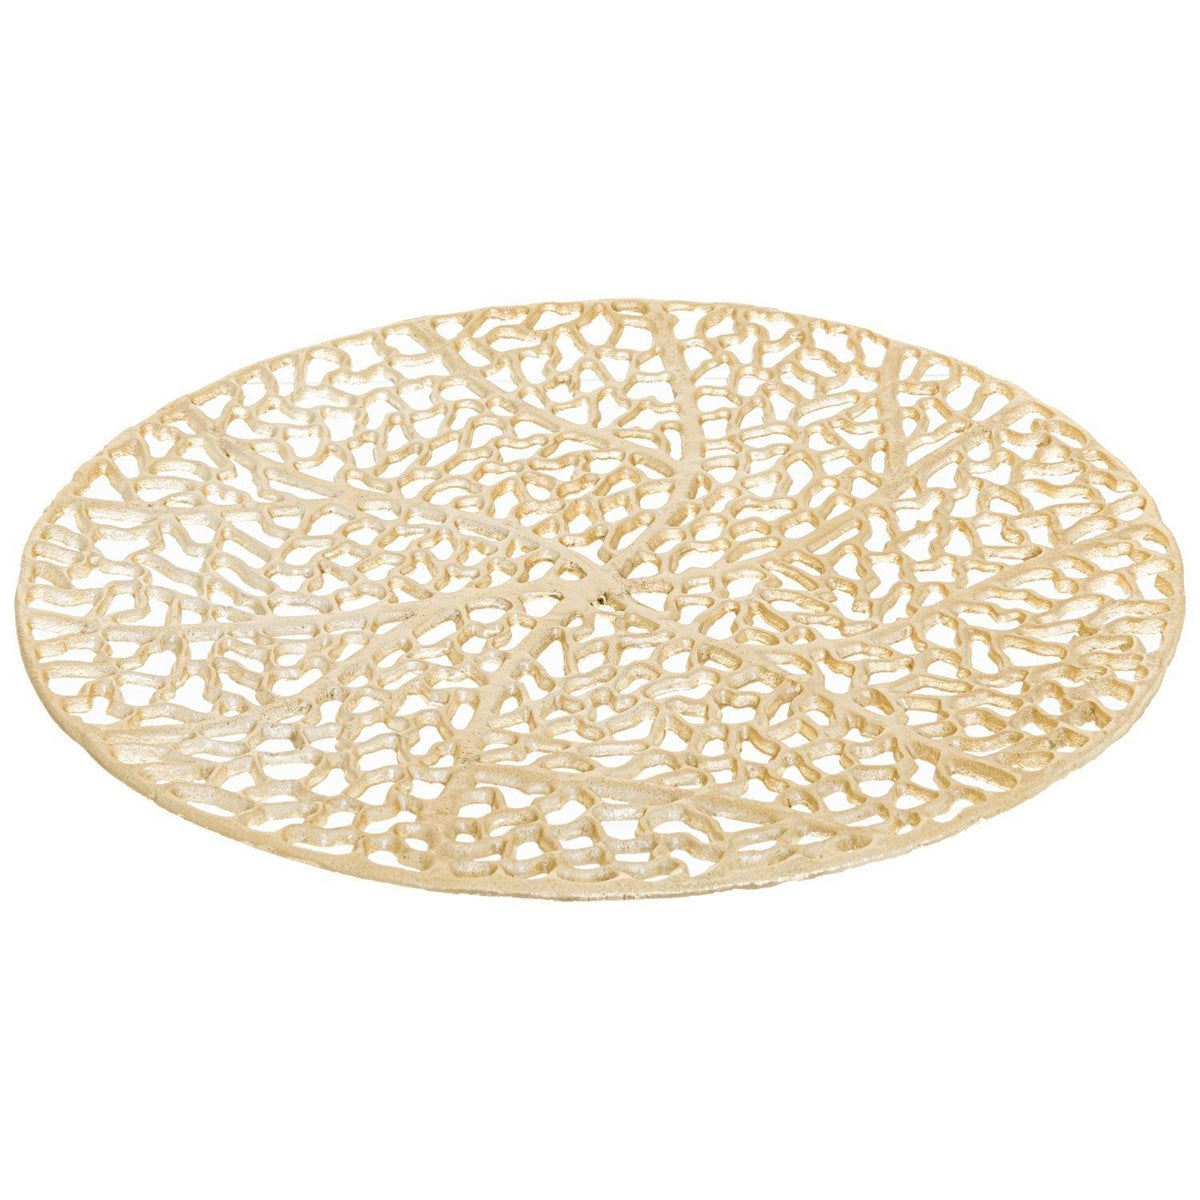 Farrah Collection Large Display Dish - Vookoo Lifestyle